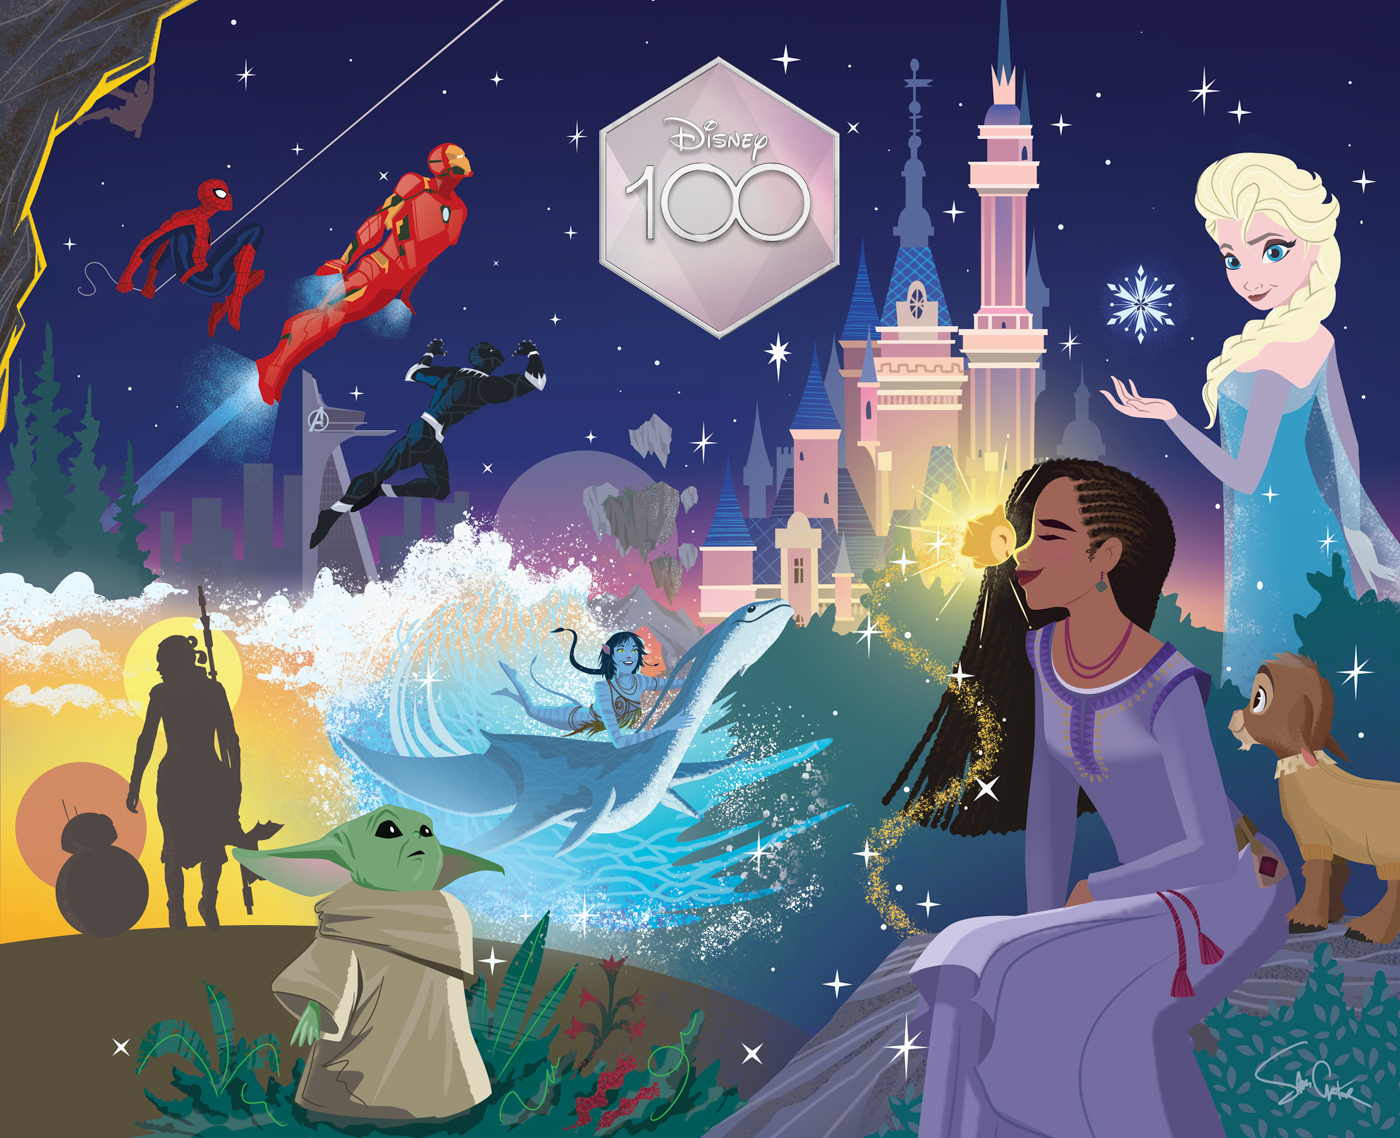 Art celebrating Disney’s modern-day milestones, including Marvel Studios’ Iron Man, Spider-Man, and Black Panther soaring through the sky; Lucasfilm’s Rey and BB-8 walking along the Jau desert; Kiri from Avatar: The Way of Water; Elsa; Grogu; and Asha, Star, and Valentino from Wish. In the background, Shanghai Disneyland’s castle and Avenger’s Tower sit against a purple, starry sky. In the top center of the art is an iridescent, diamond-like logo for Disney100.